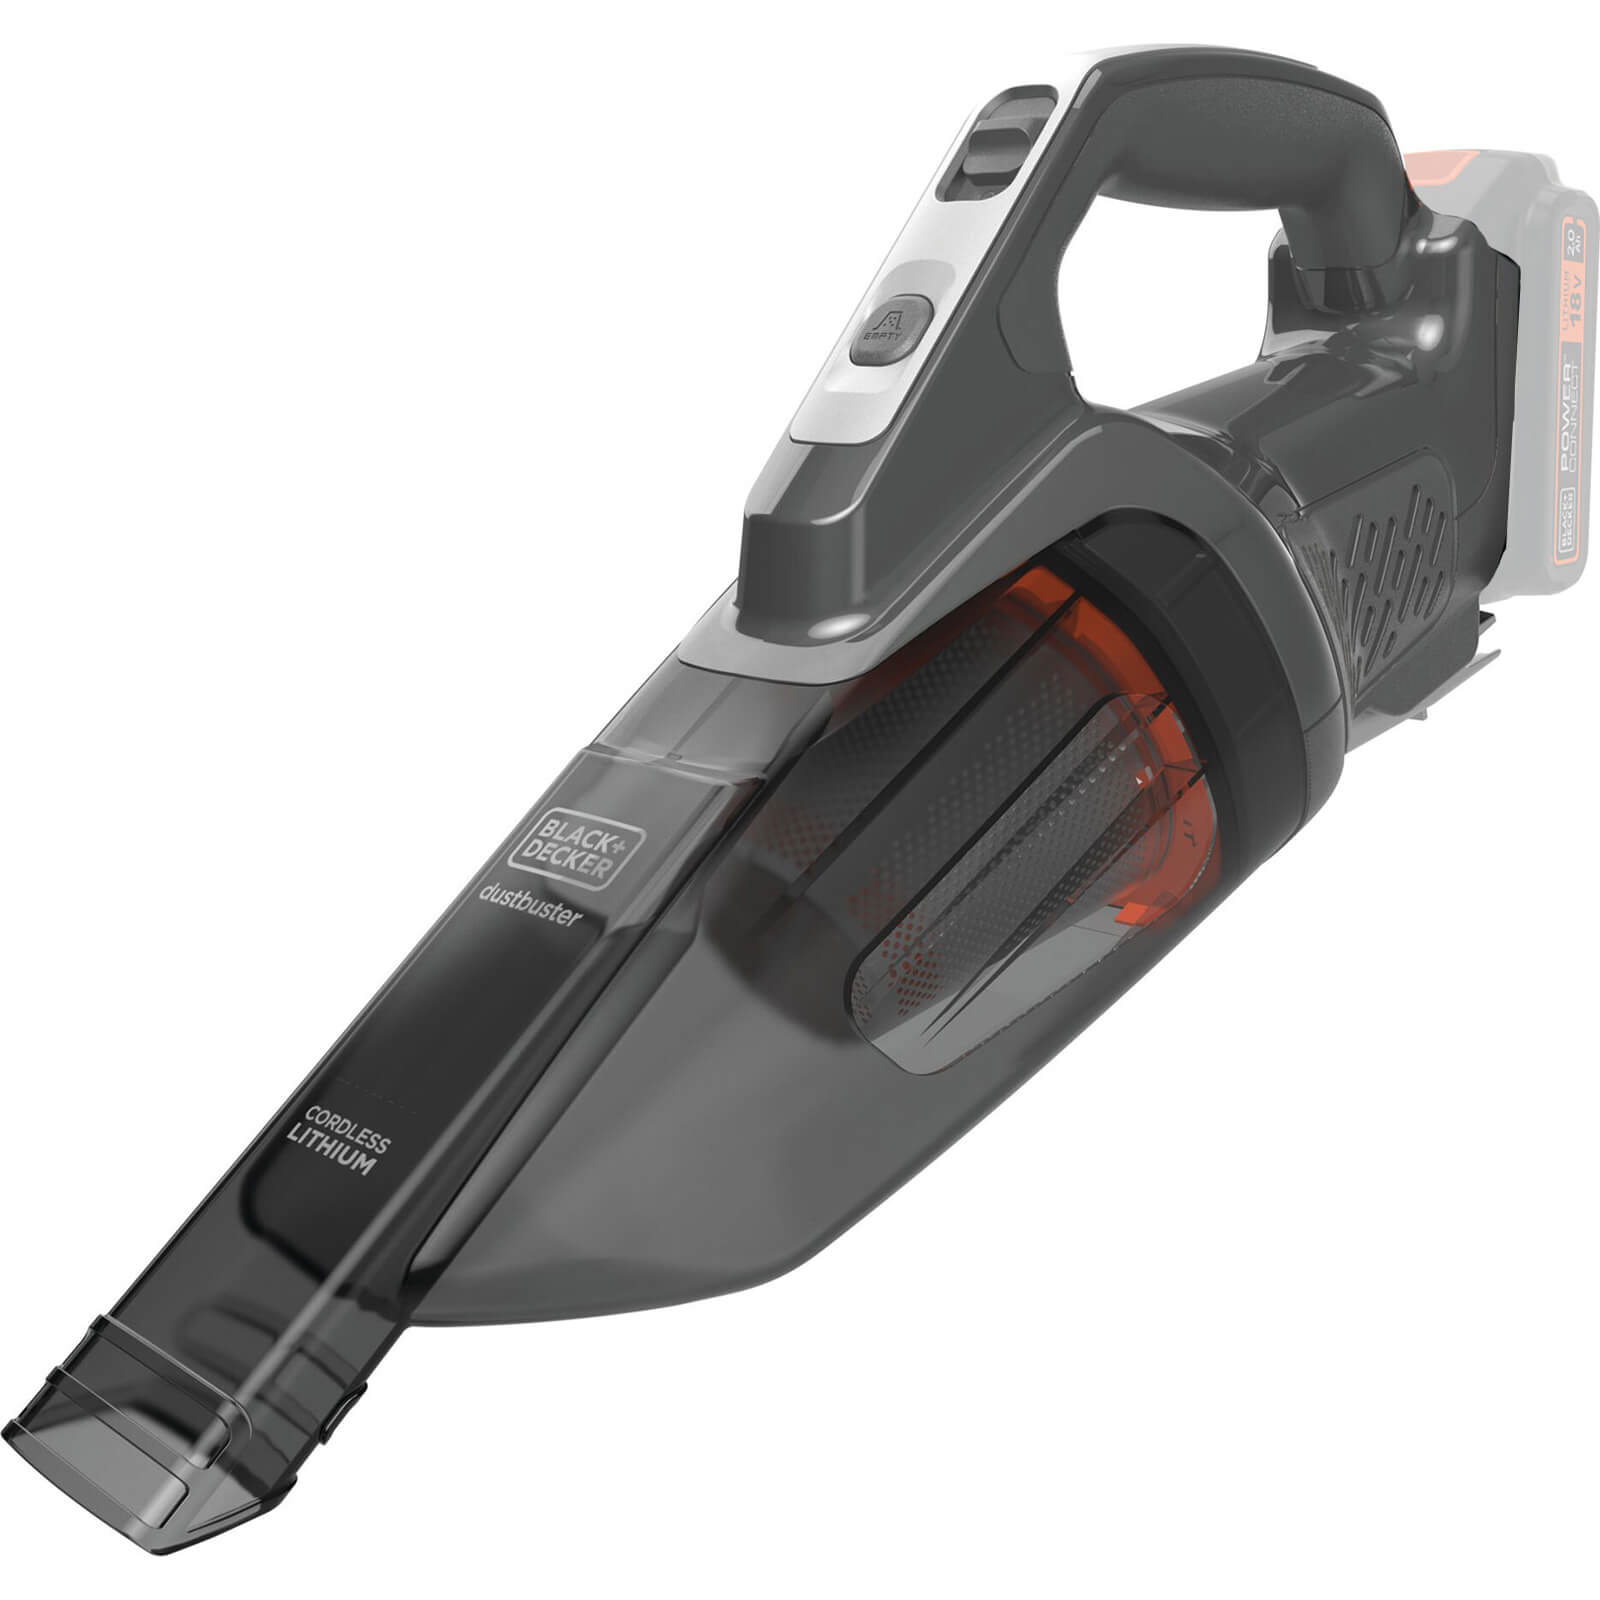 Image of Black and Decker BCHV001 18v Cordless Hand Dustbuster No Batteries No Charger No Case